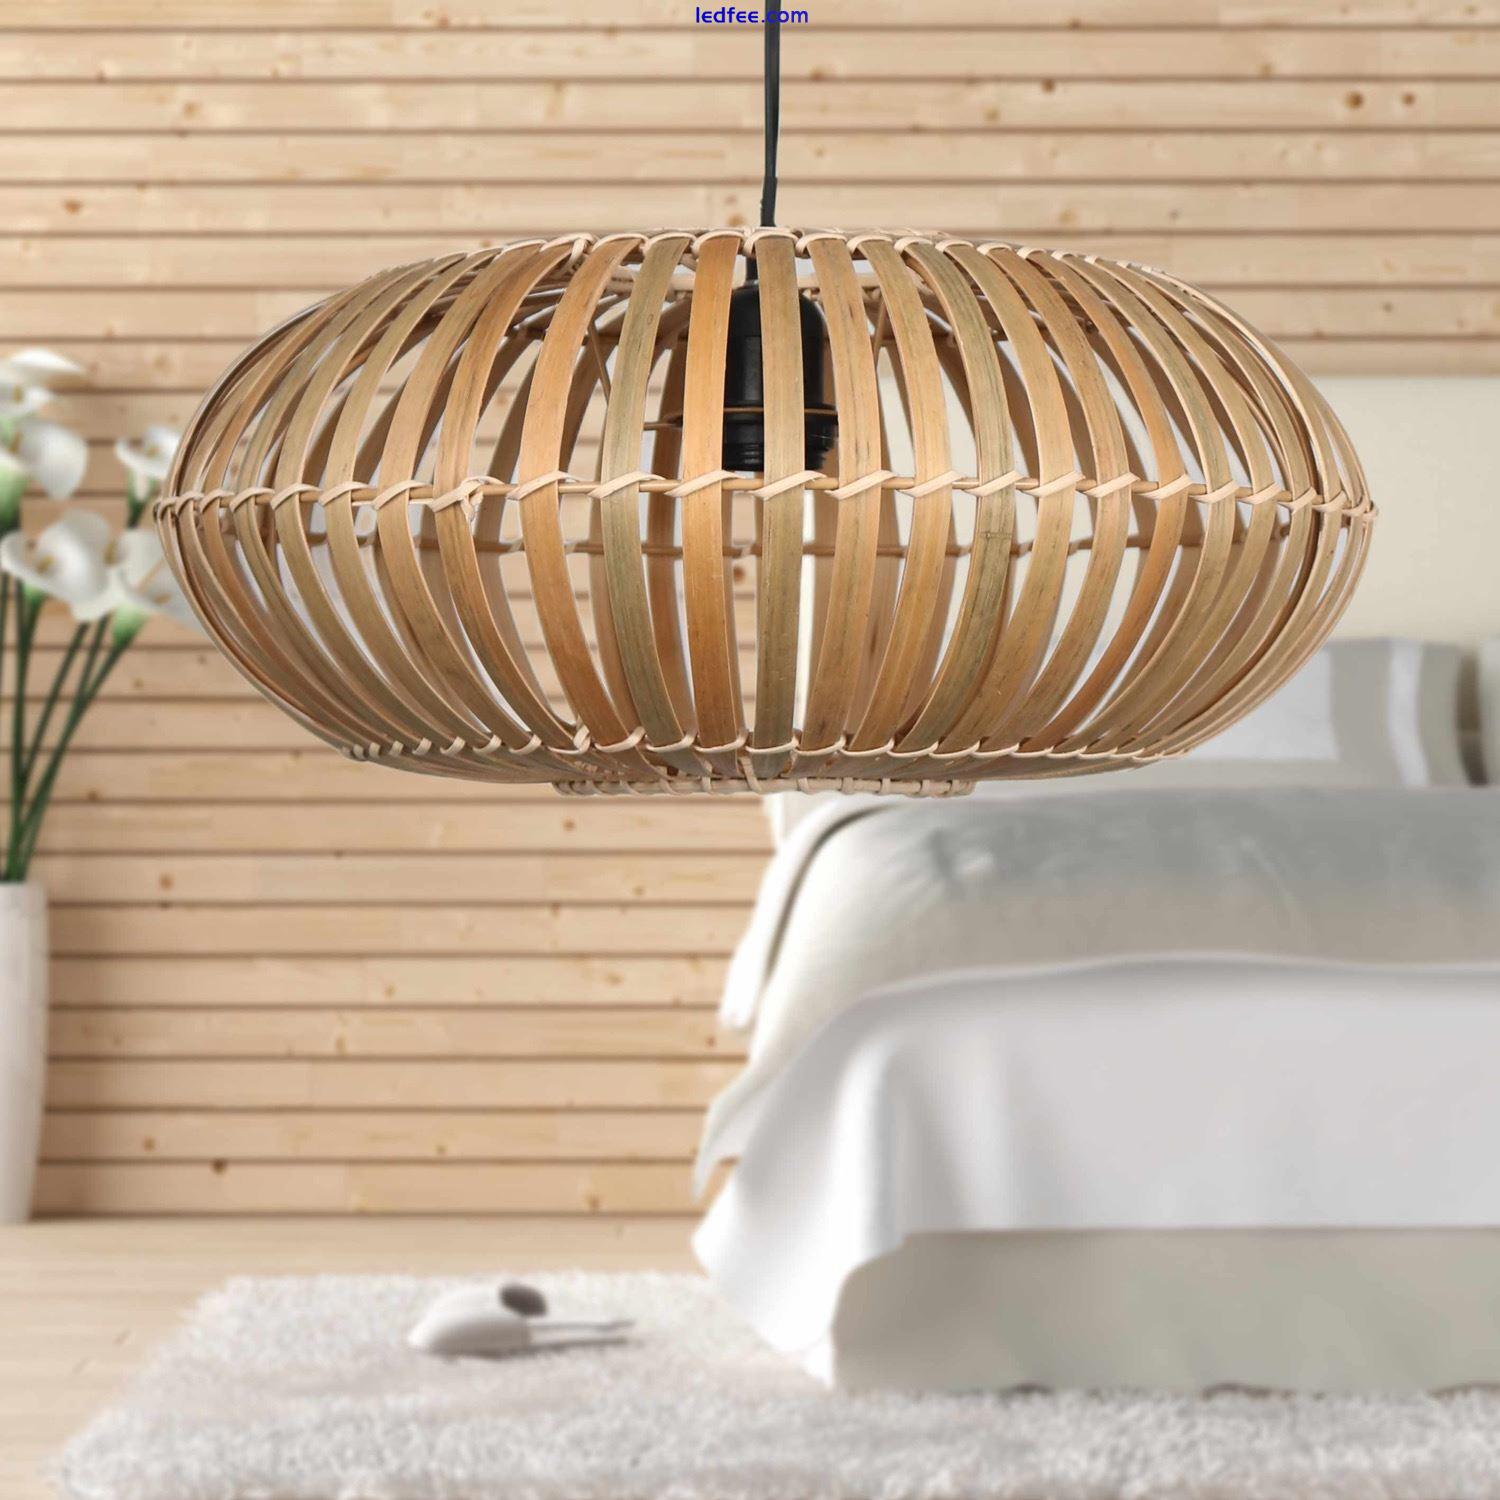 Natural Bamboo Wicker Ceiling Light Shade Pendant Lampshade Easy Fit Scandi Boho 2 